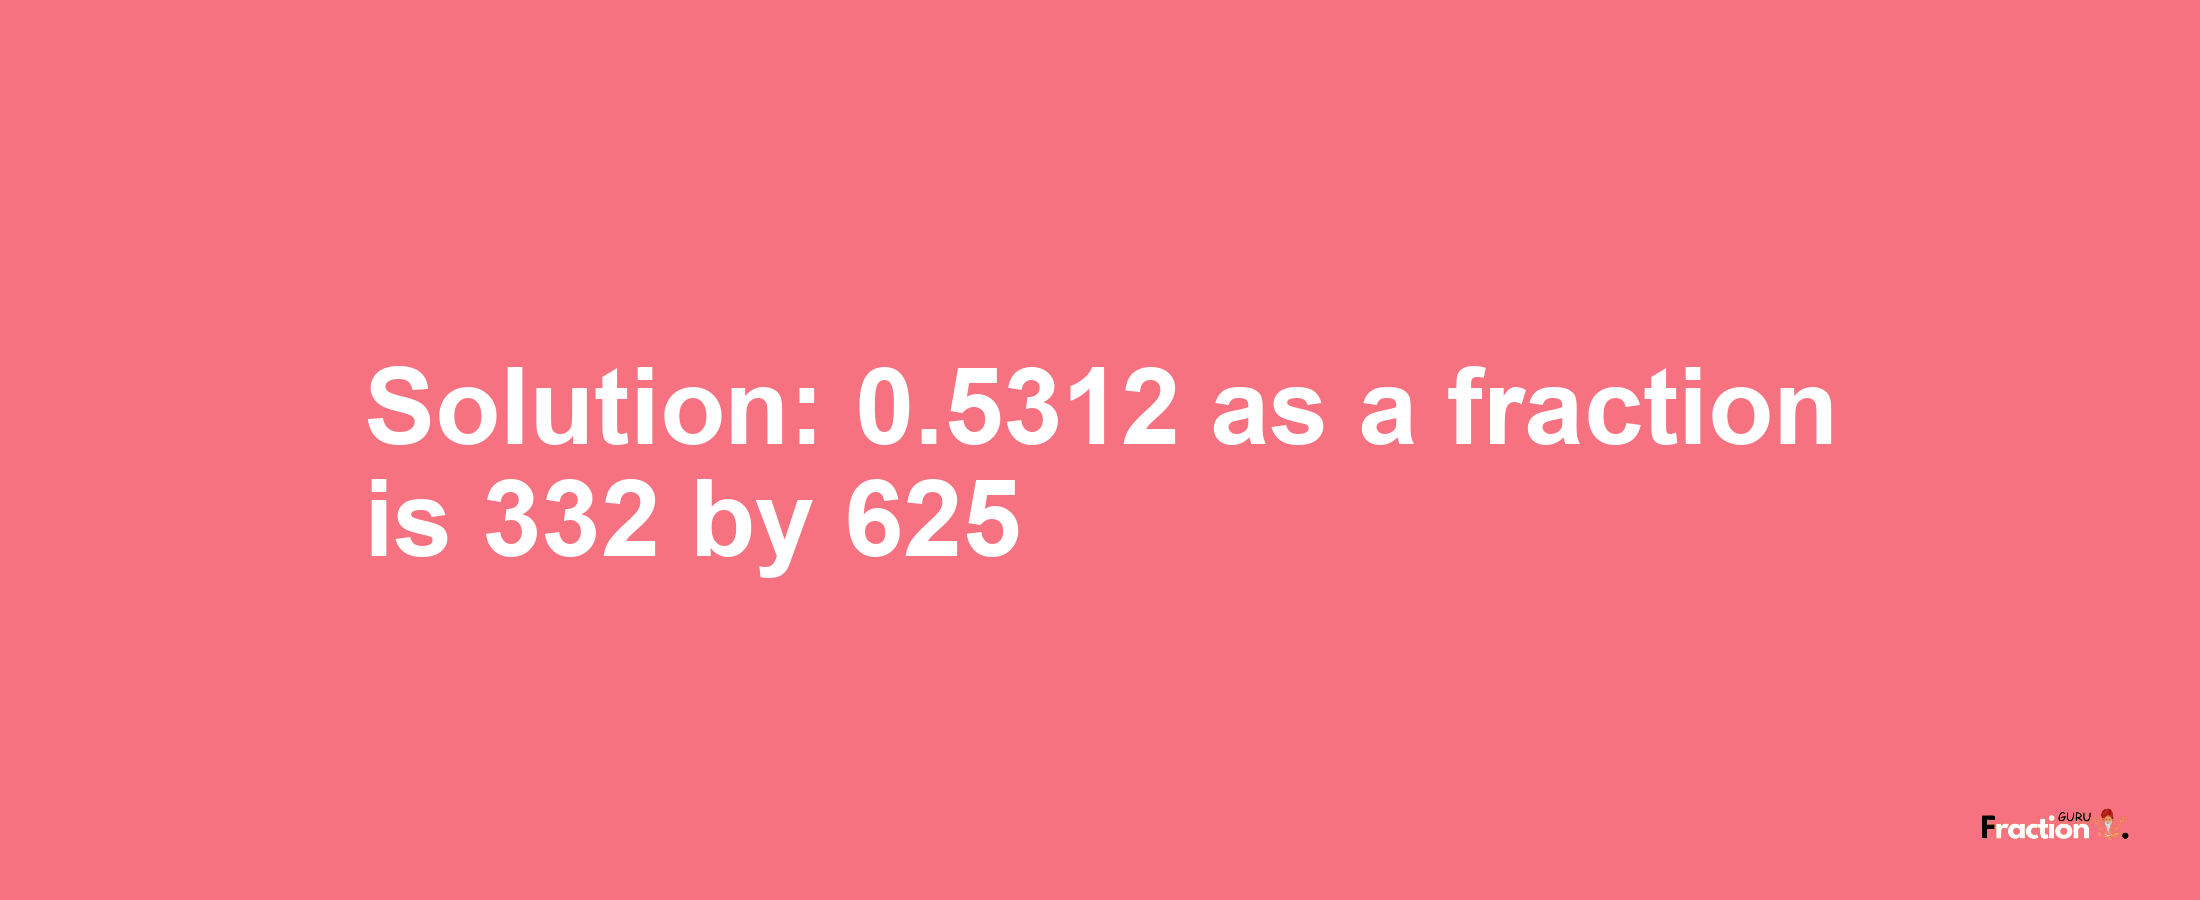 Solution:0.5312 as a fraction is 332/625